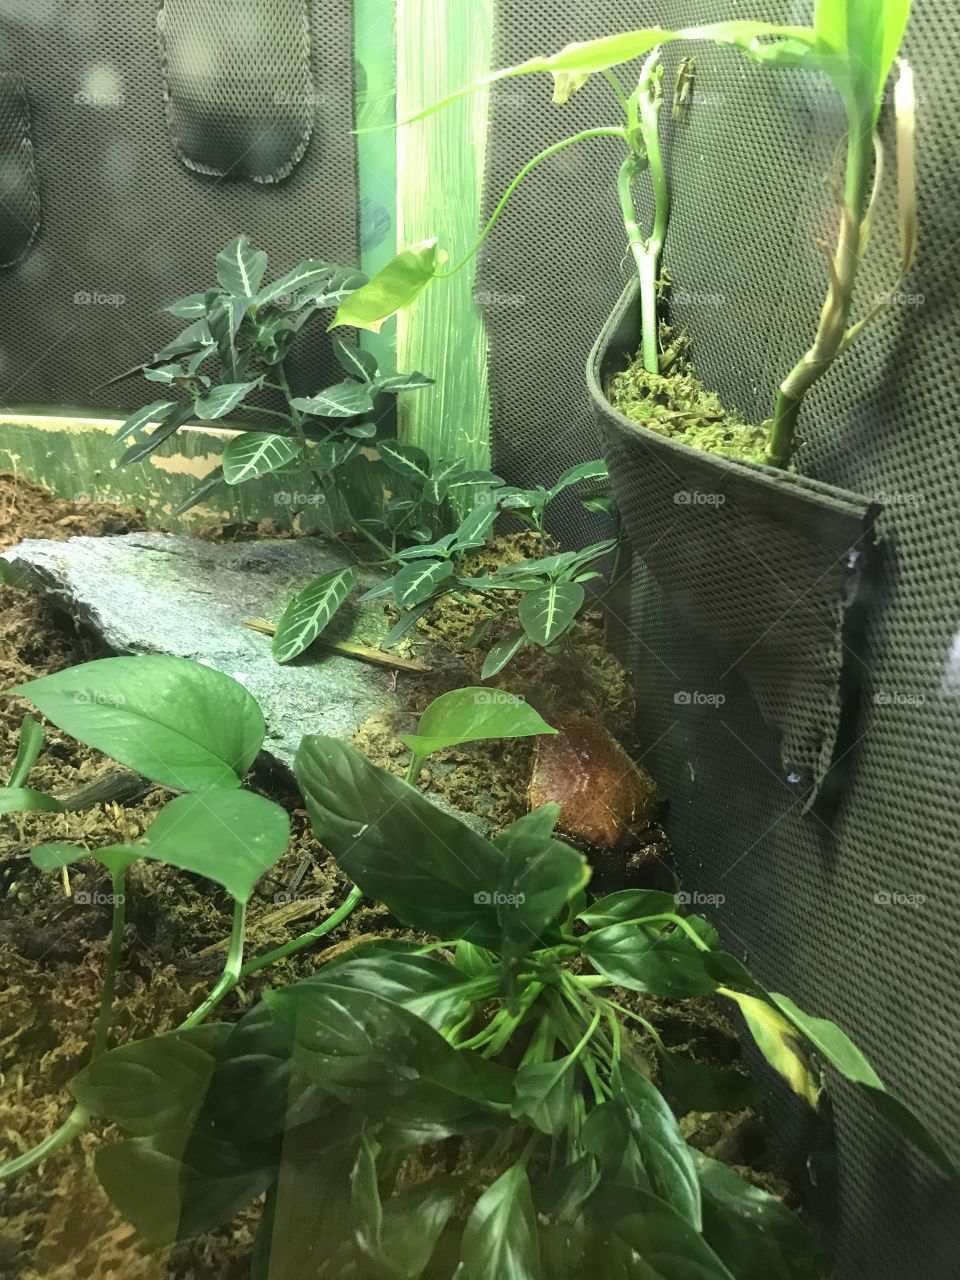 Find the frog in this display  at the Smithsonian national zoo in Washington DC